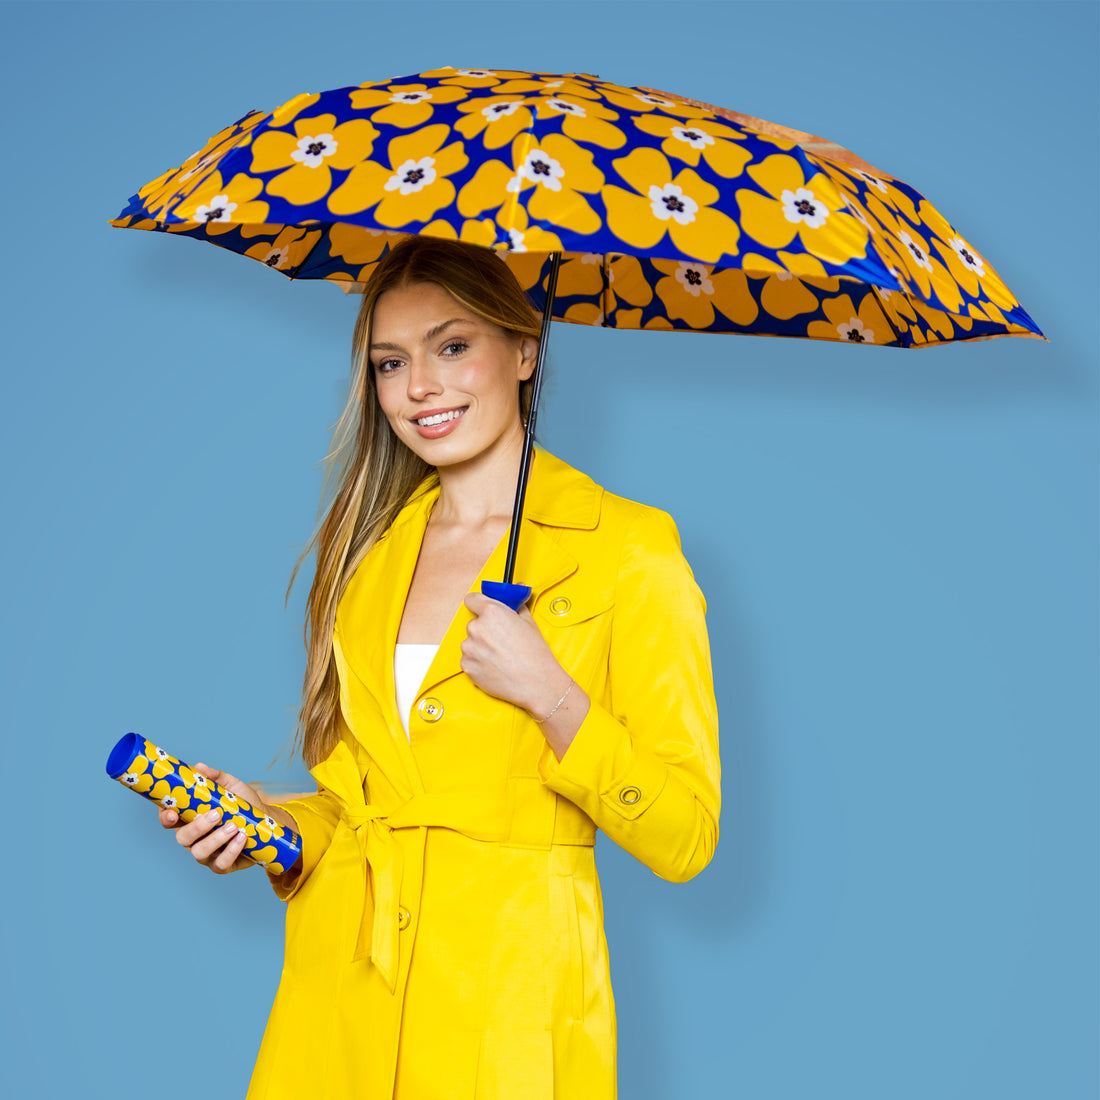  Yellow and Blue Patterned Umbrella by Vinrella with Yellow raincoat style